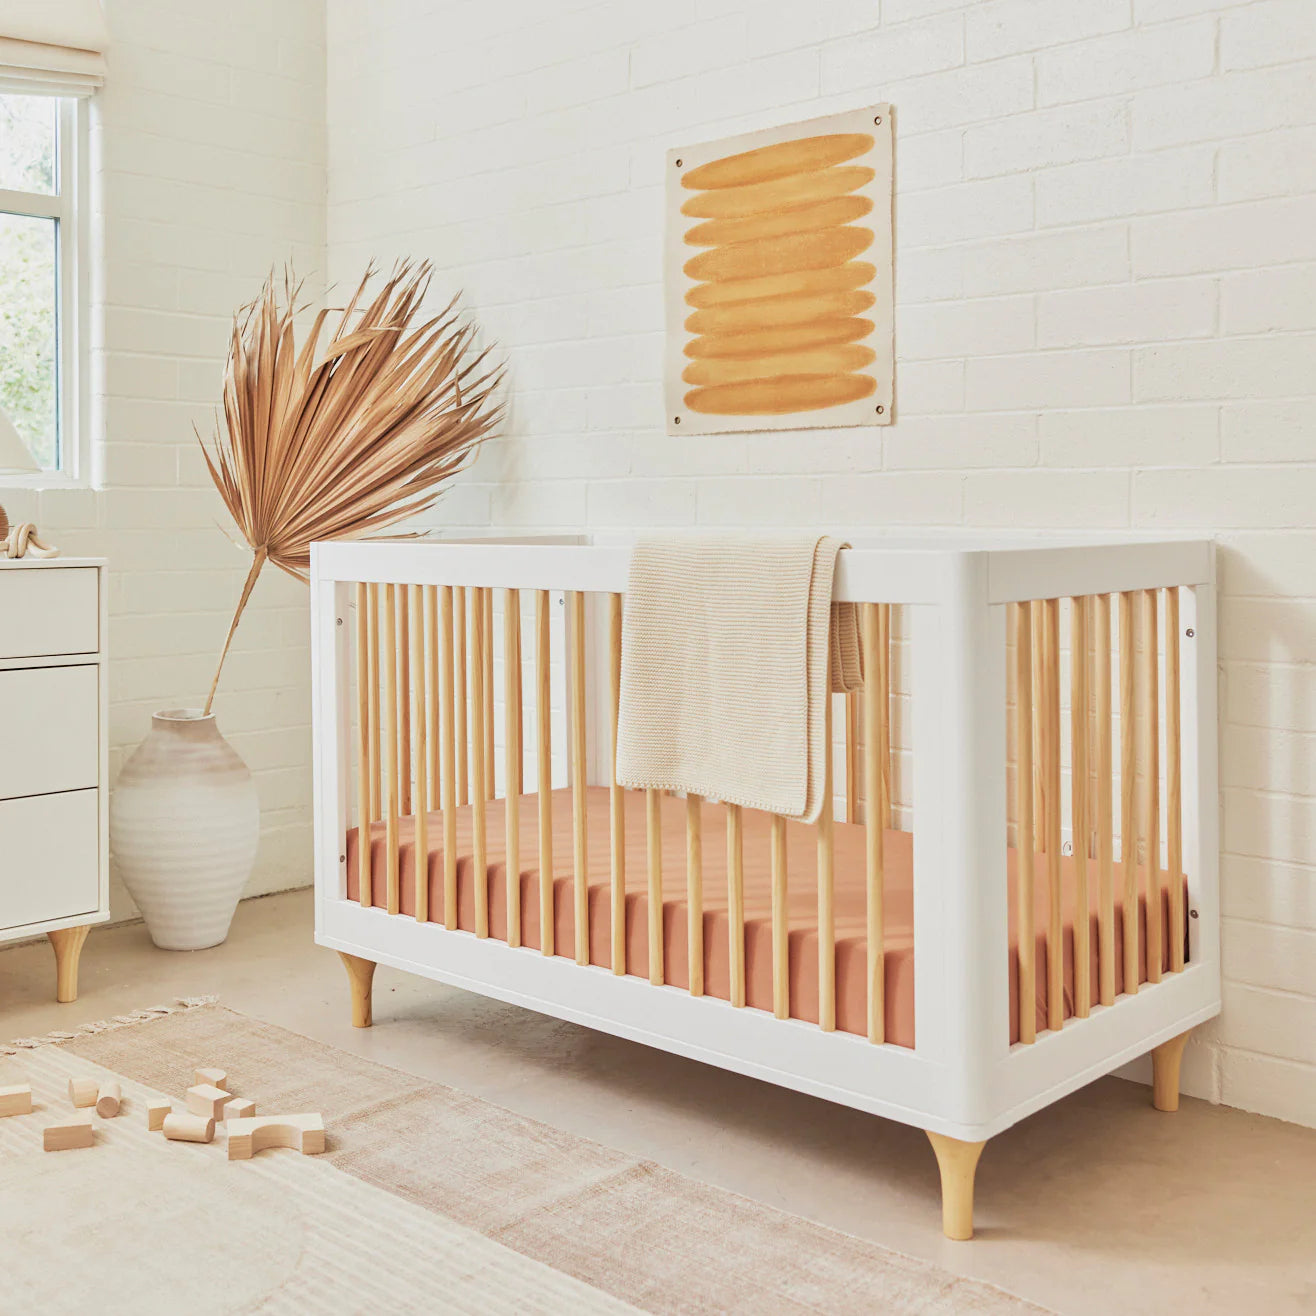 Babyletto Lolly 3-in-1 Convertible Crib - White / Natural Lifestyle 2